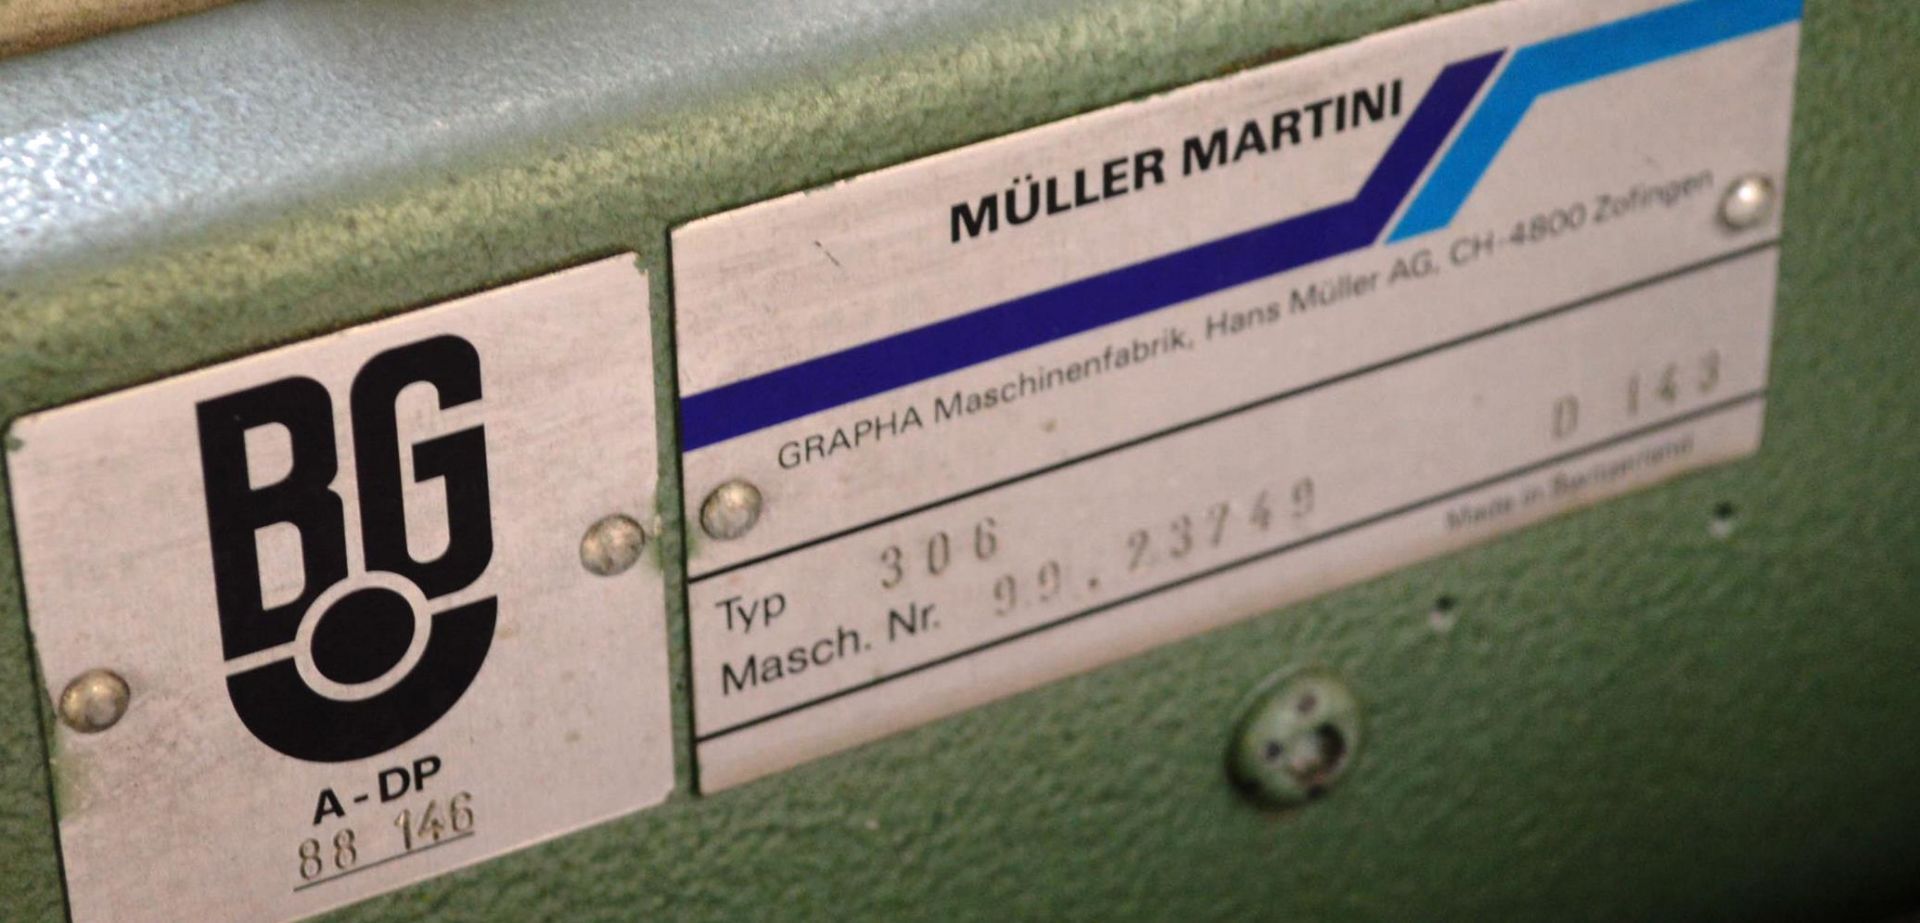 Muller Martini 321 5+1 SADDLE STITCHING LINE, comprising:- five 306 feeders, serial no’s 99.23749 - Image 7 of 11